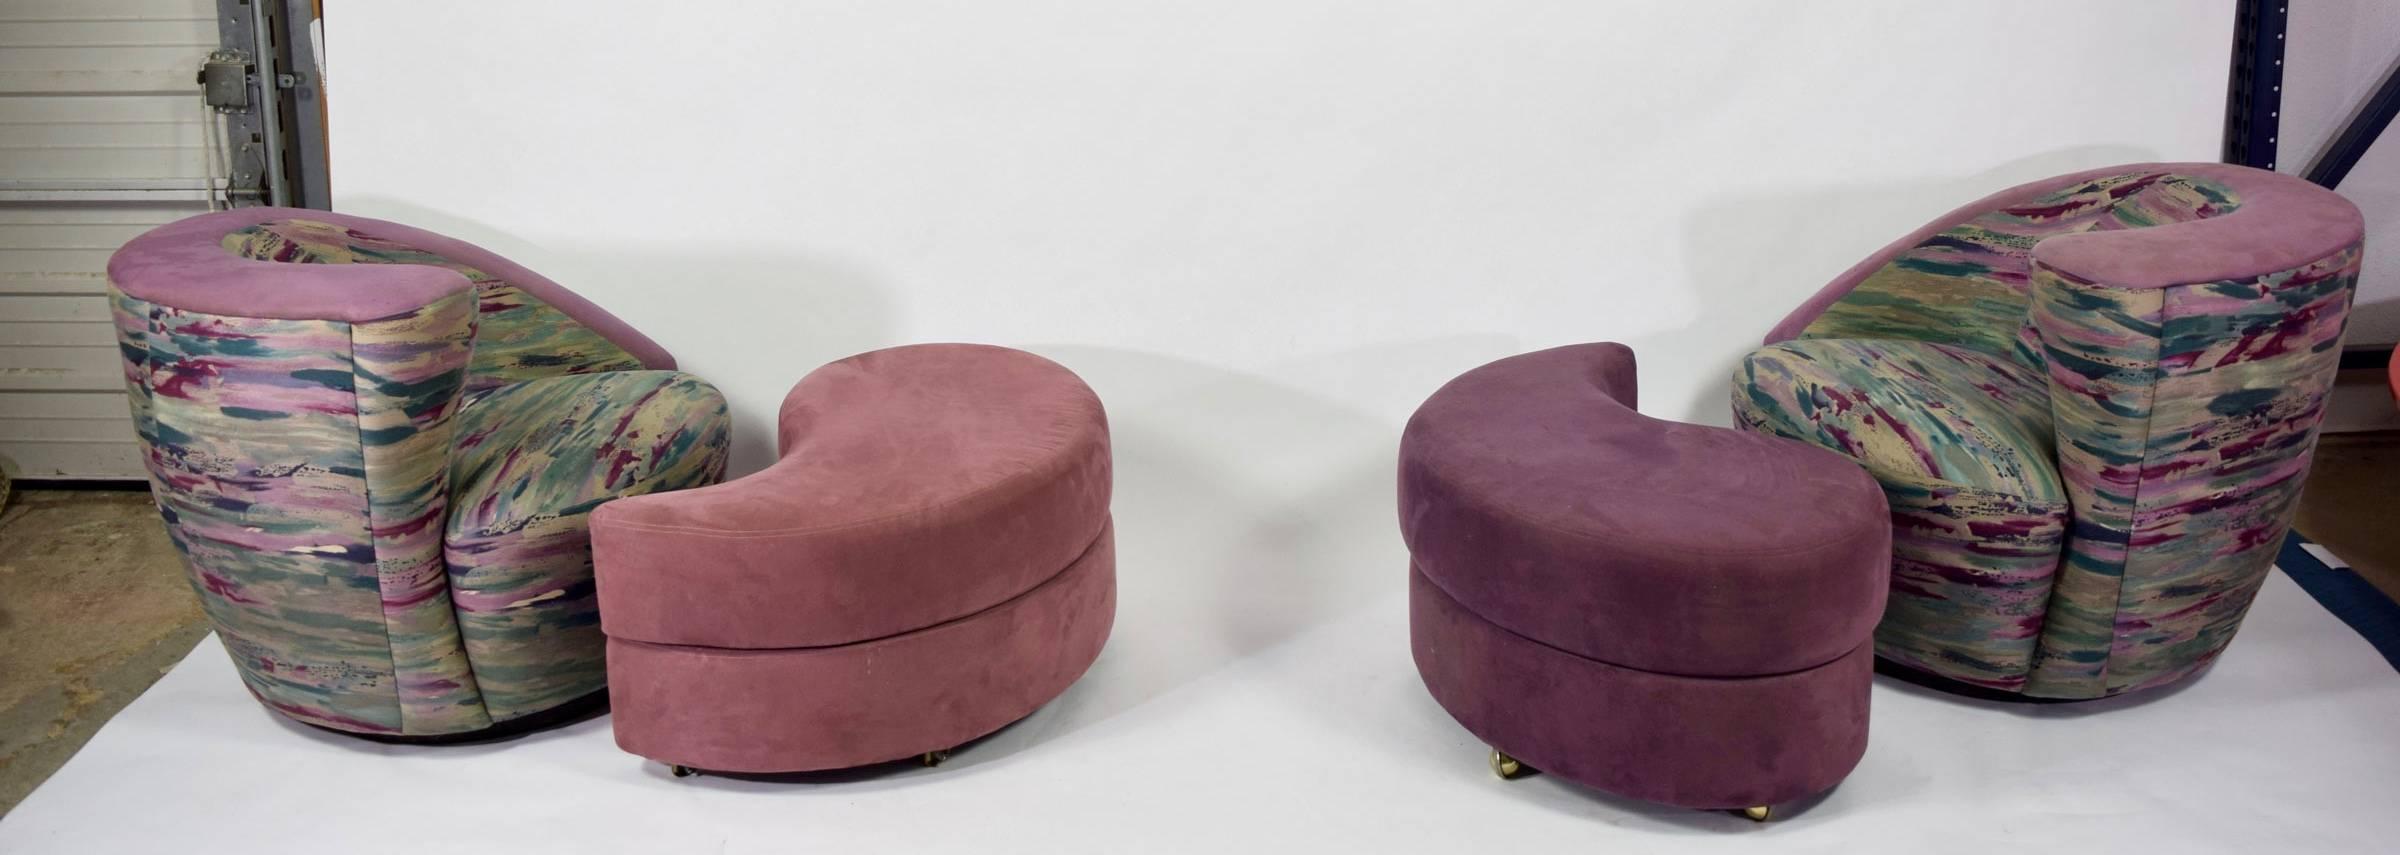 Pair of Vladimir Kagan Corkscrew/Nautilus chairs with ottomans. Chairs have swivel base, ottomans are on casters but they can be removed if desired.